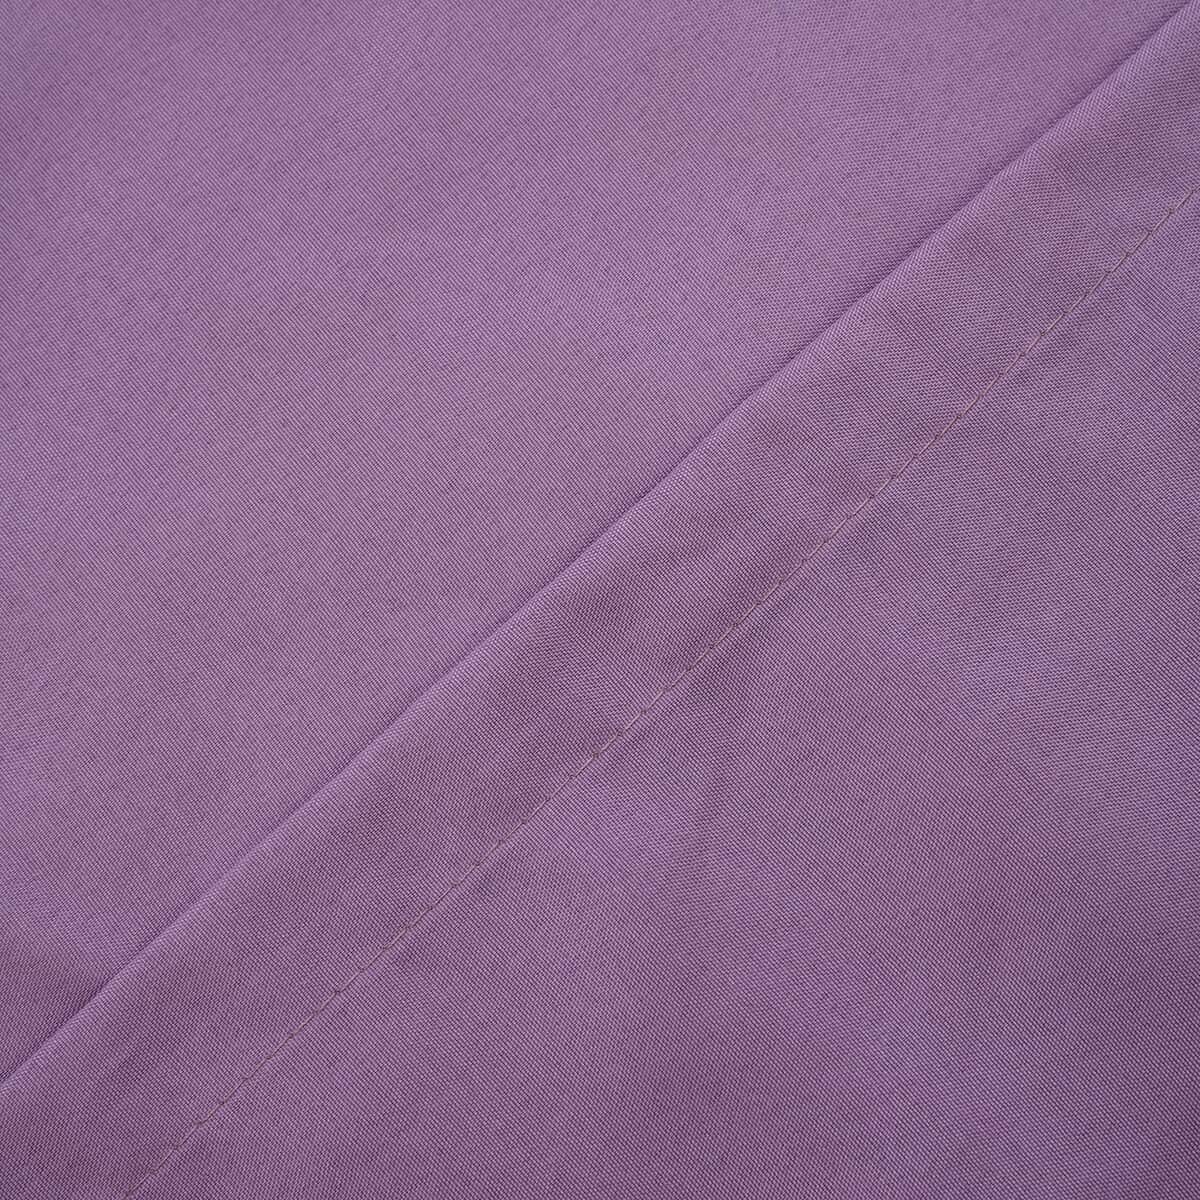 Homesmart Mauve 3D Pinsonic Embossed Pattern Quilt with 2 Shams - Queen (Microfiber) image number 4